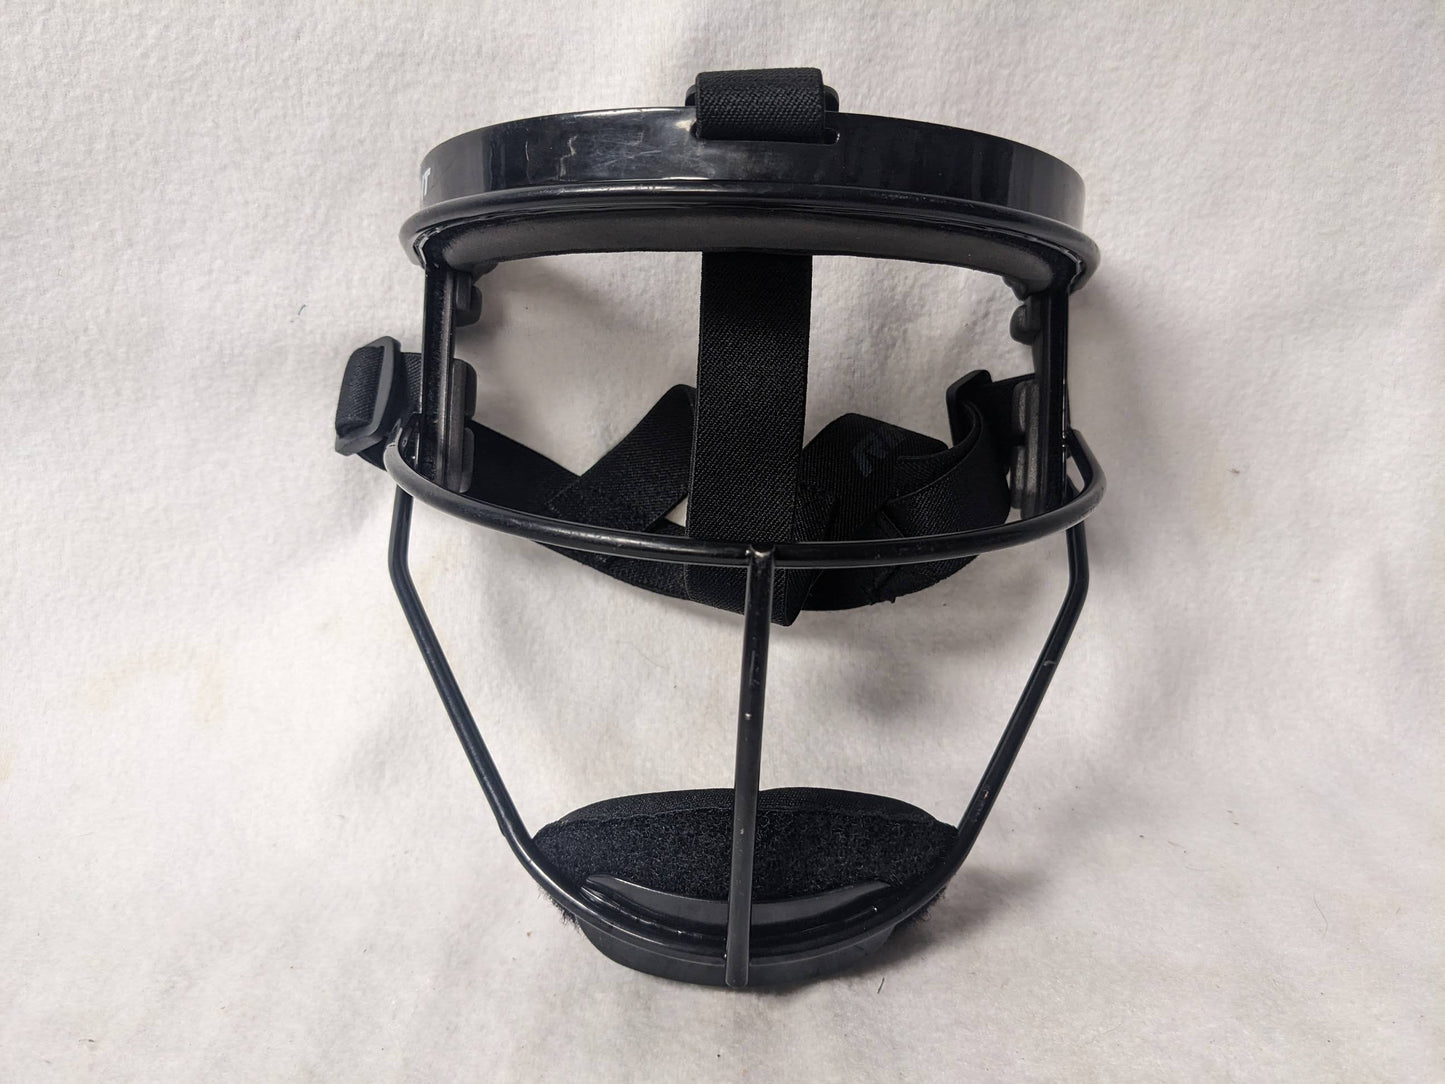 Rip-It Defense Adult Softball Mask Size Adult Color Black Condition Used